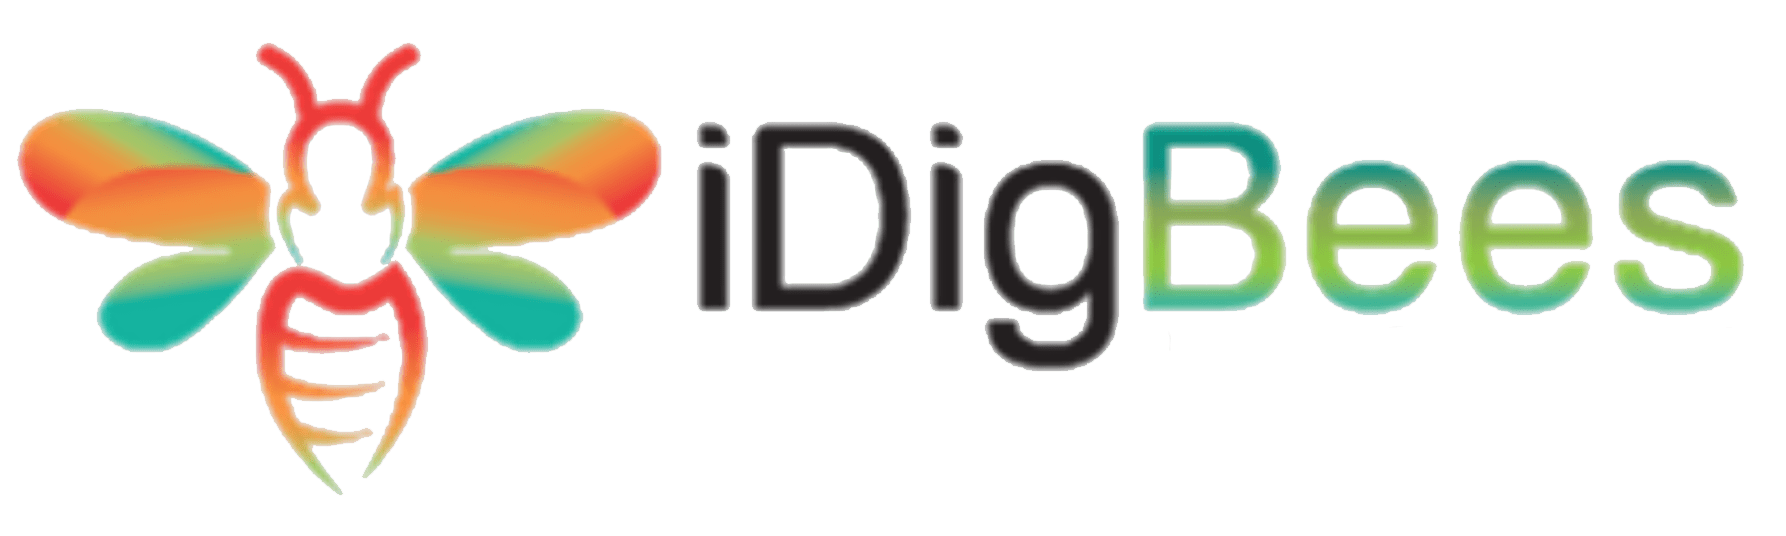 The iDigBees logo with a colourful bee and the iDigBees text on the right